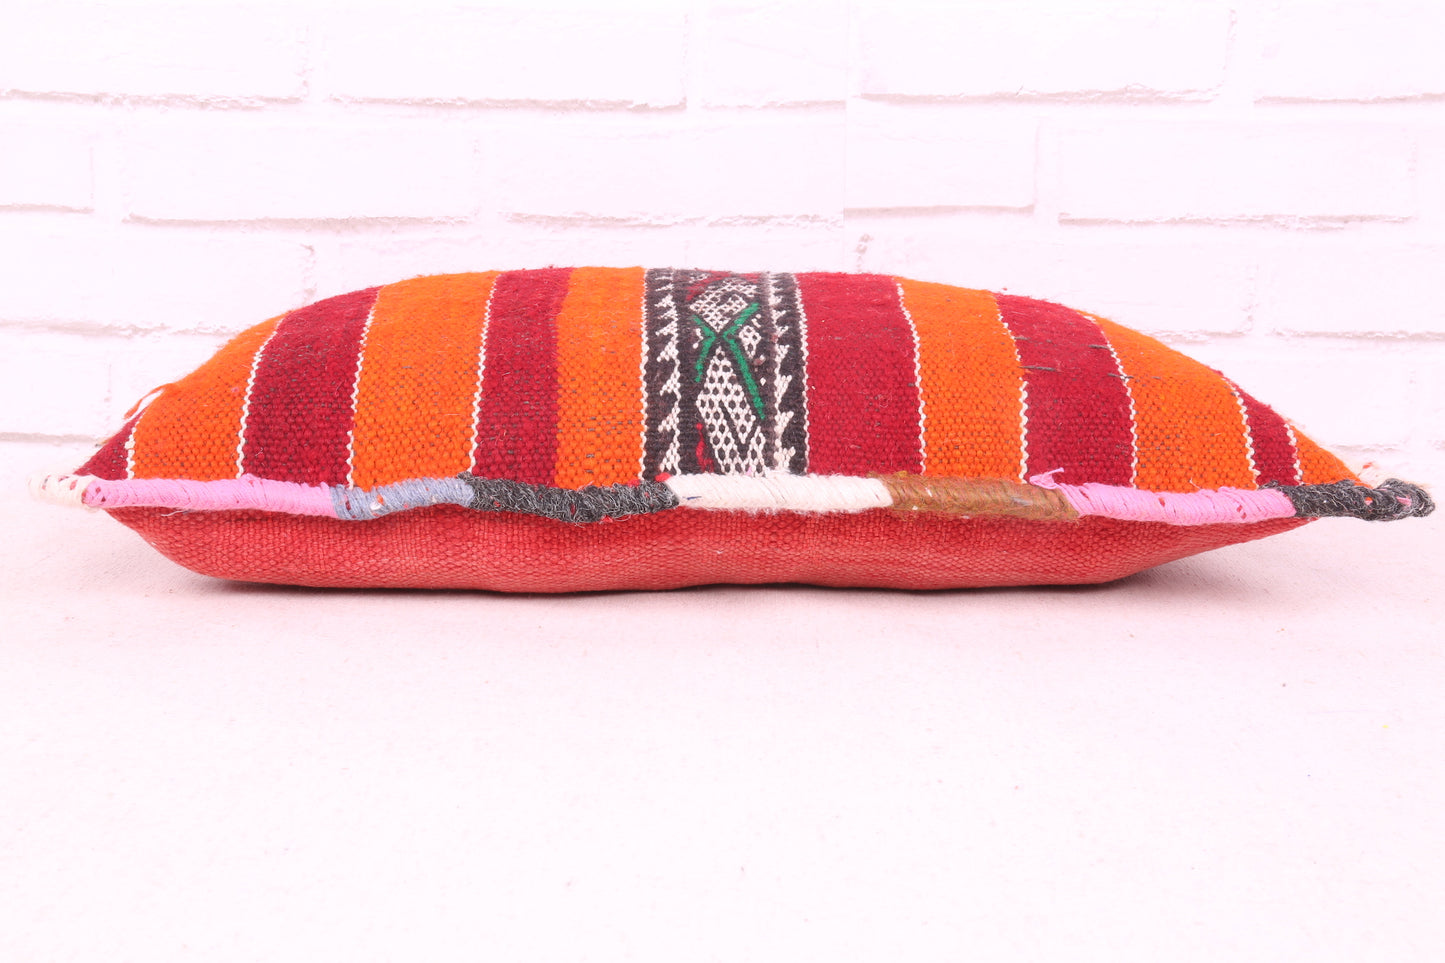 Moroccan pillow vintage 12.2 inches X 23.2 inches